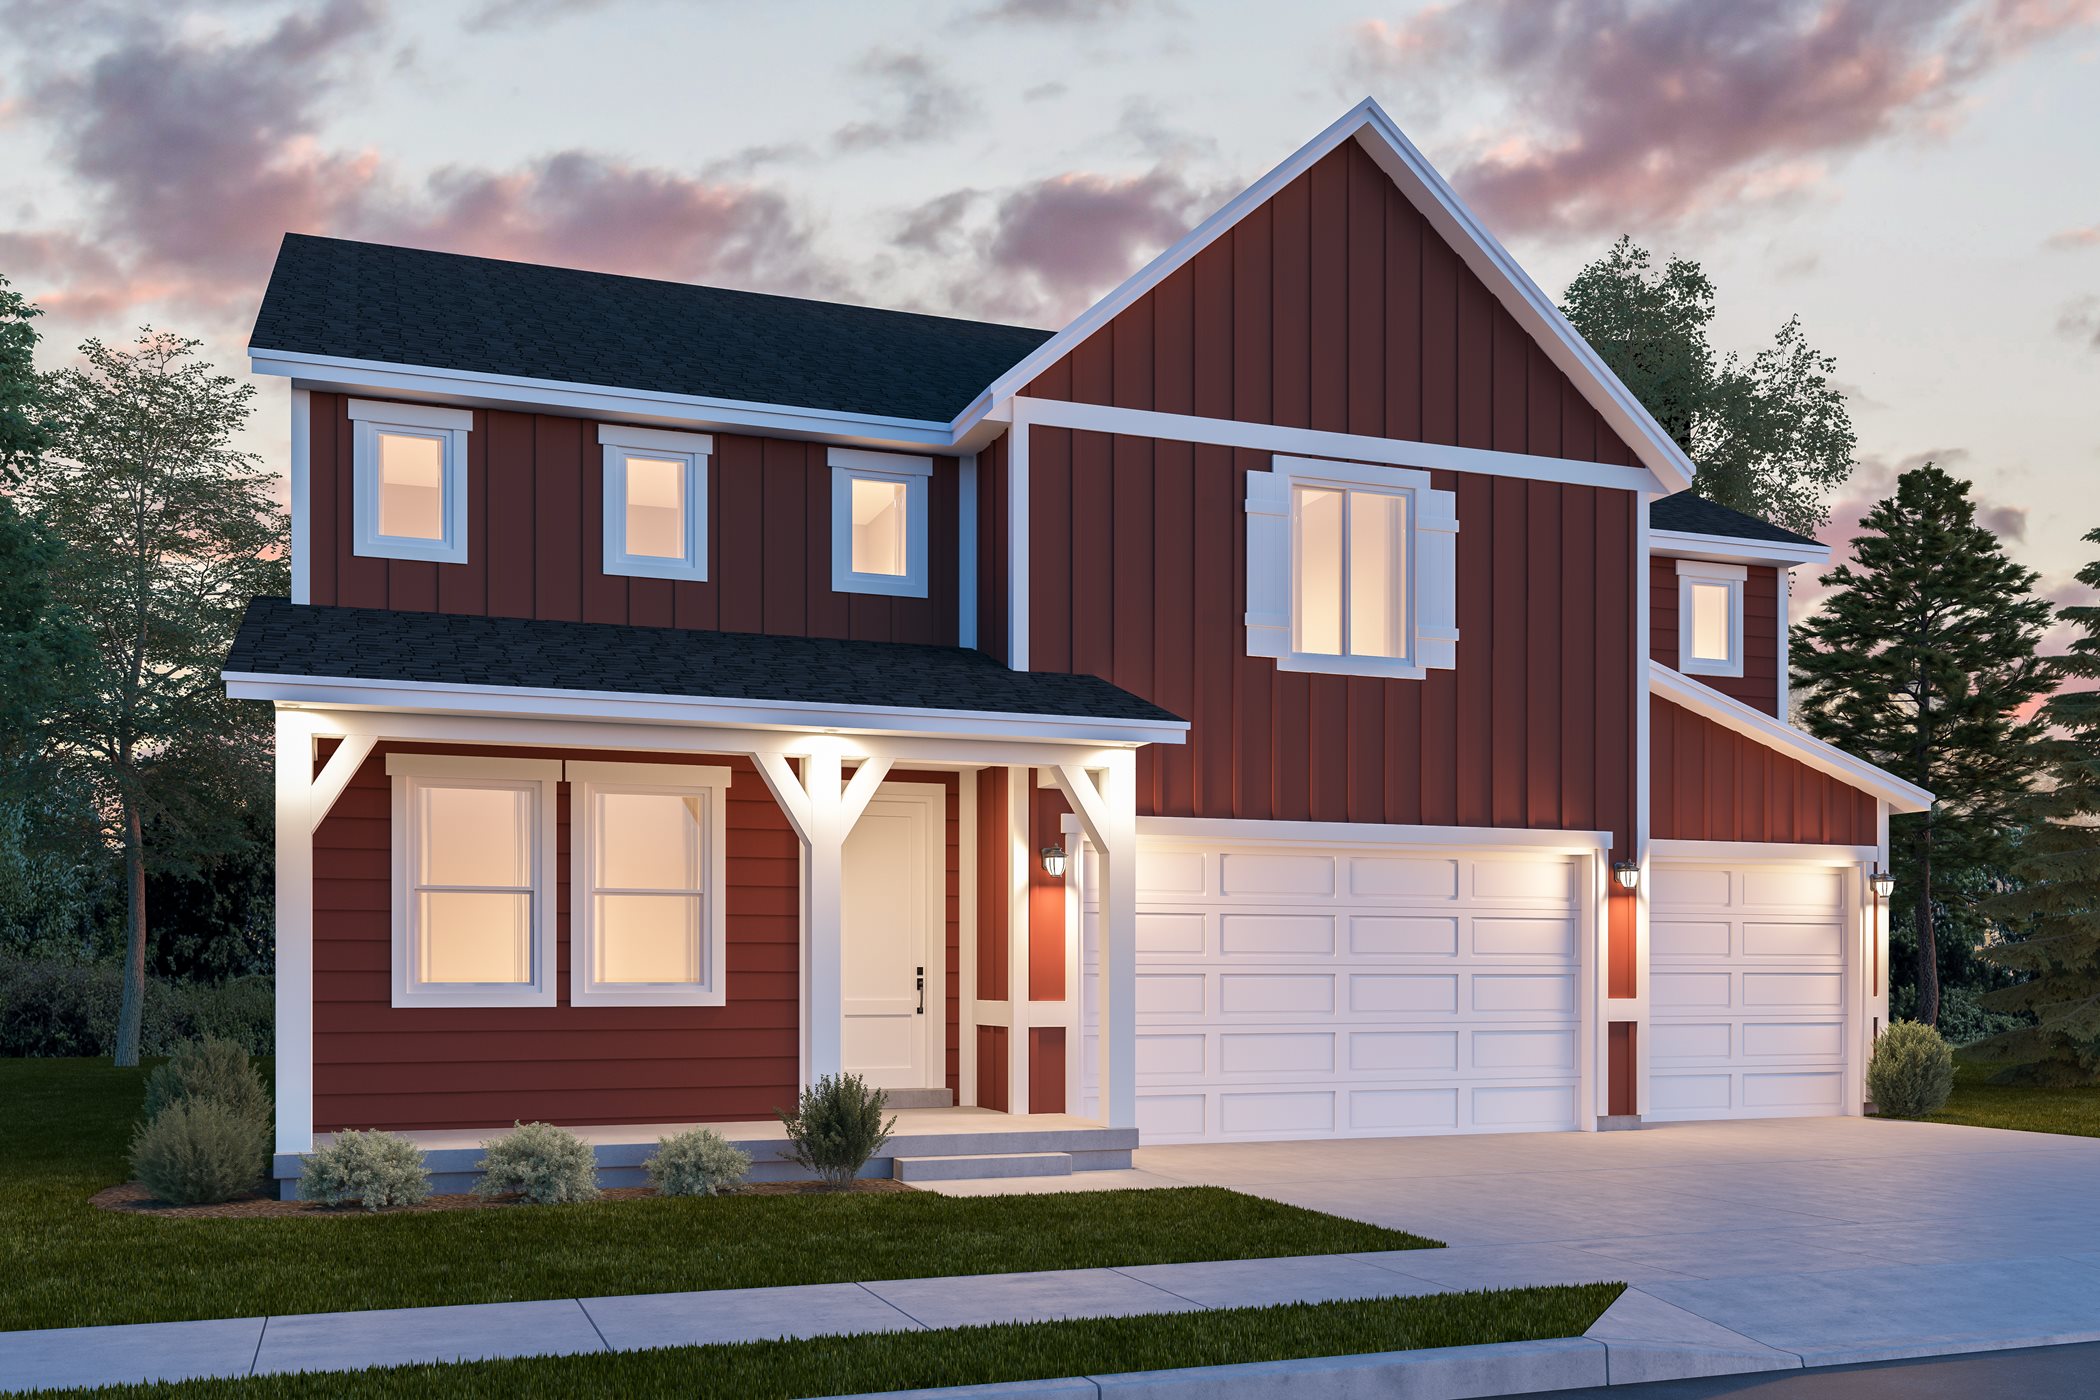 Red farmhouse Timberline rendering